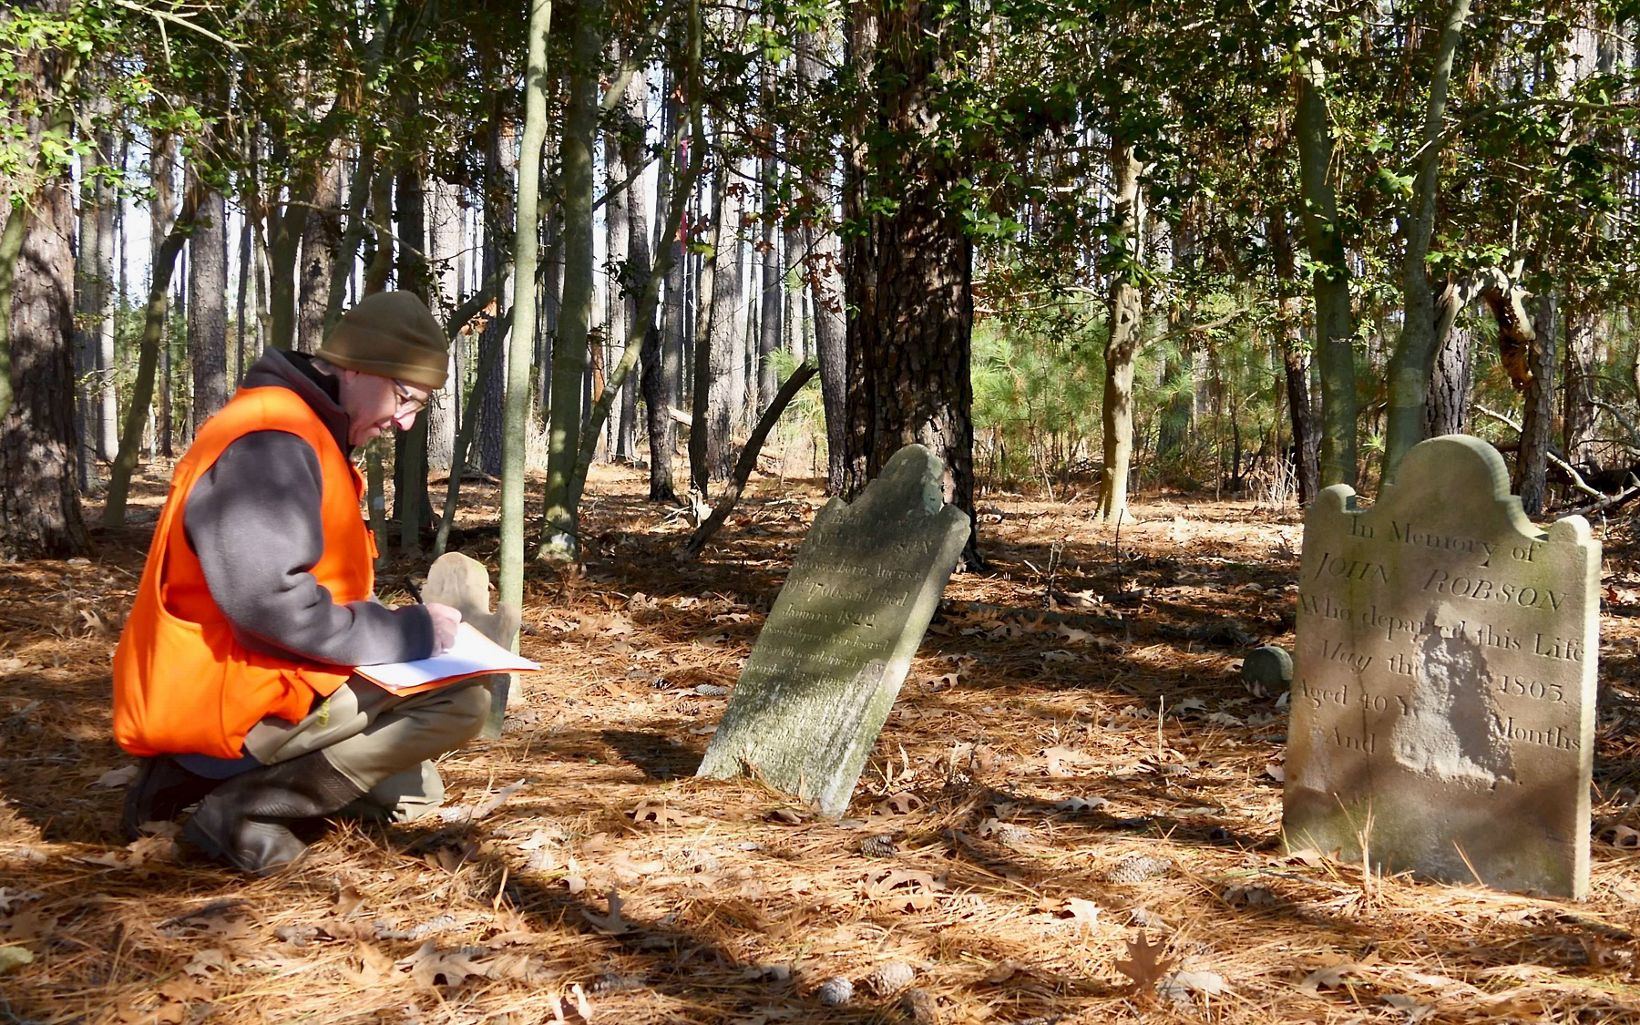 Not wanting to see this site completely lost to history, Joe Fehrer collects data about the cemetery for the Maryland Historical Trust.